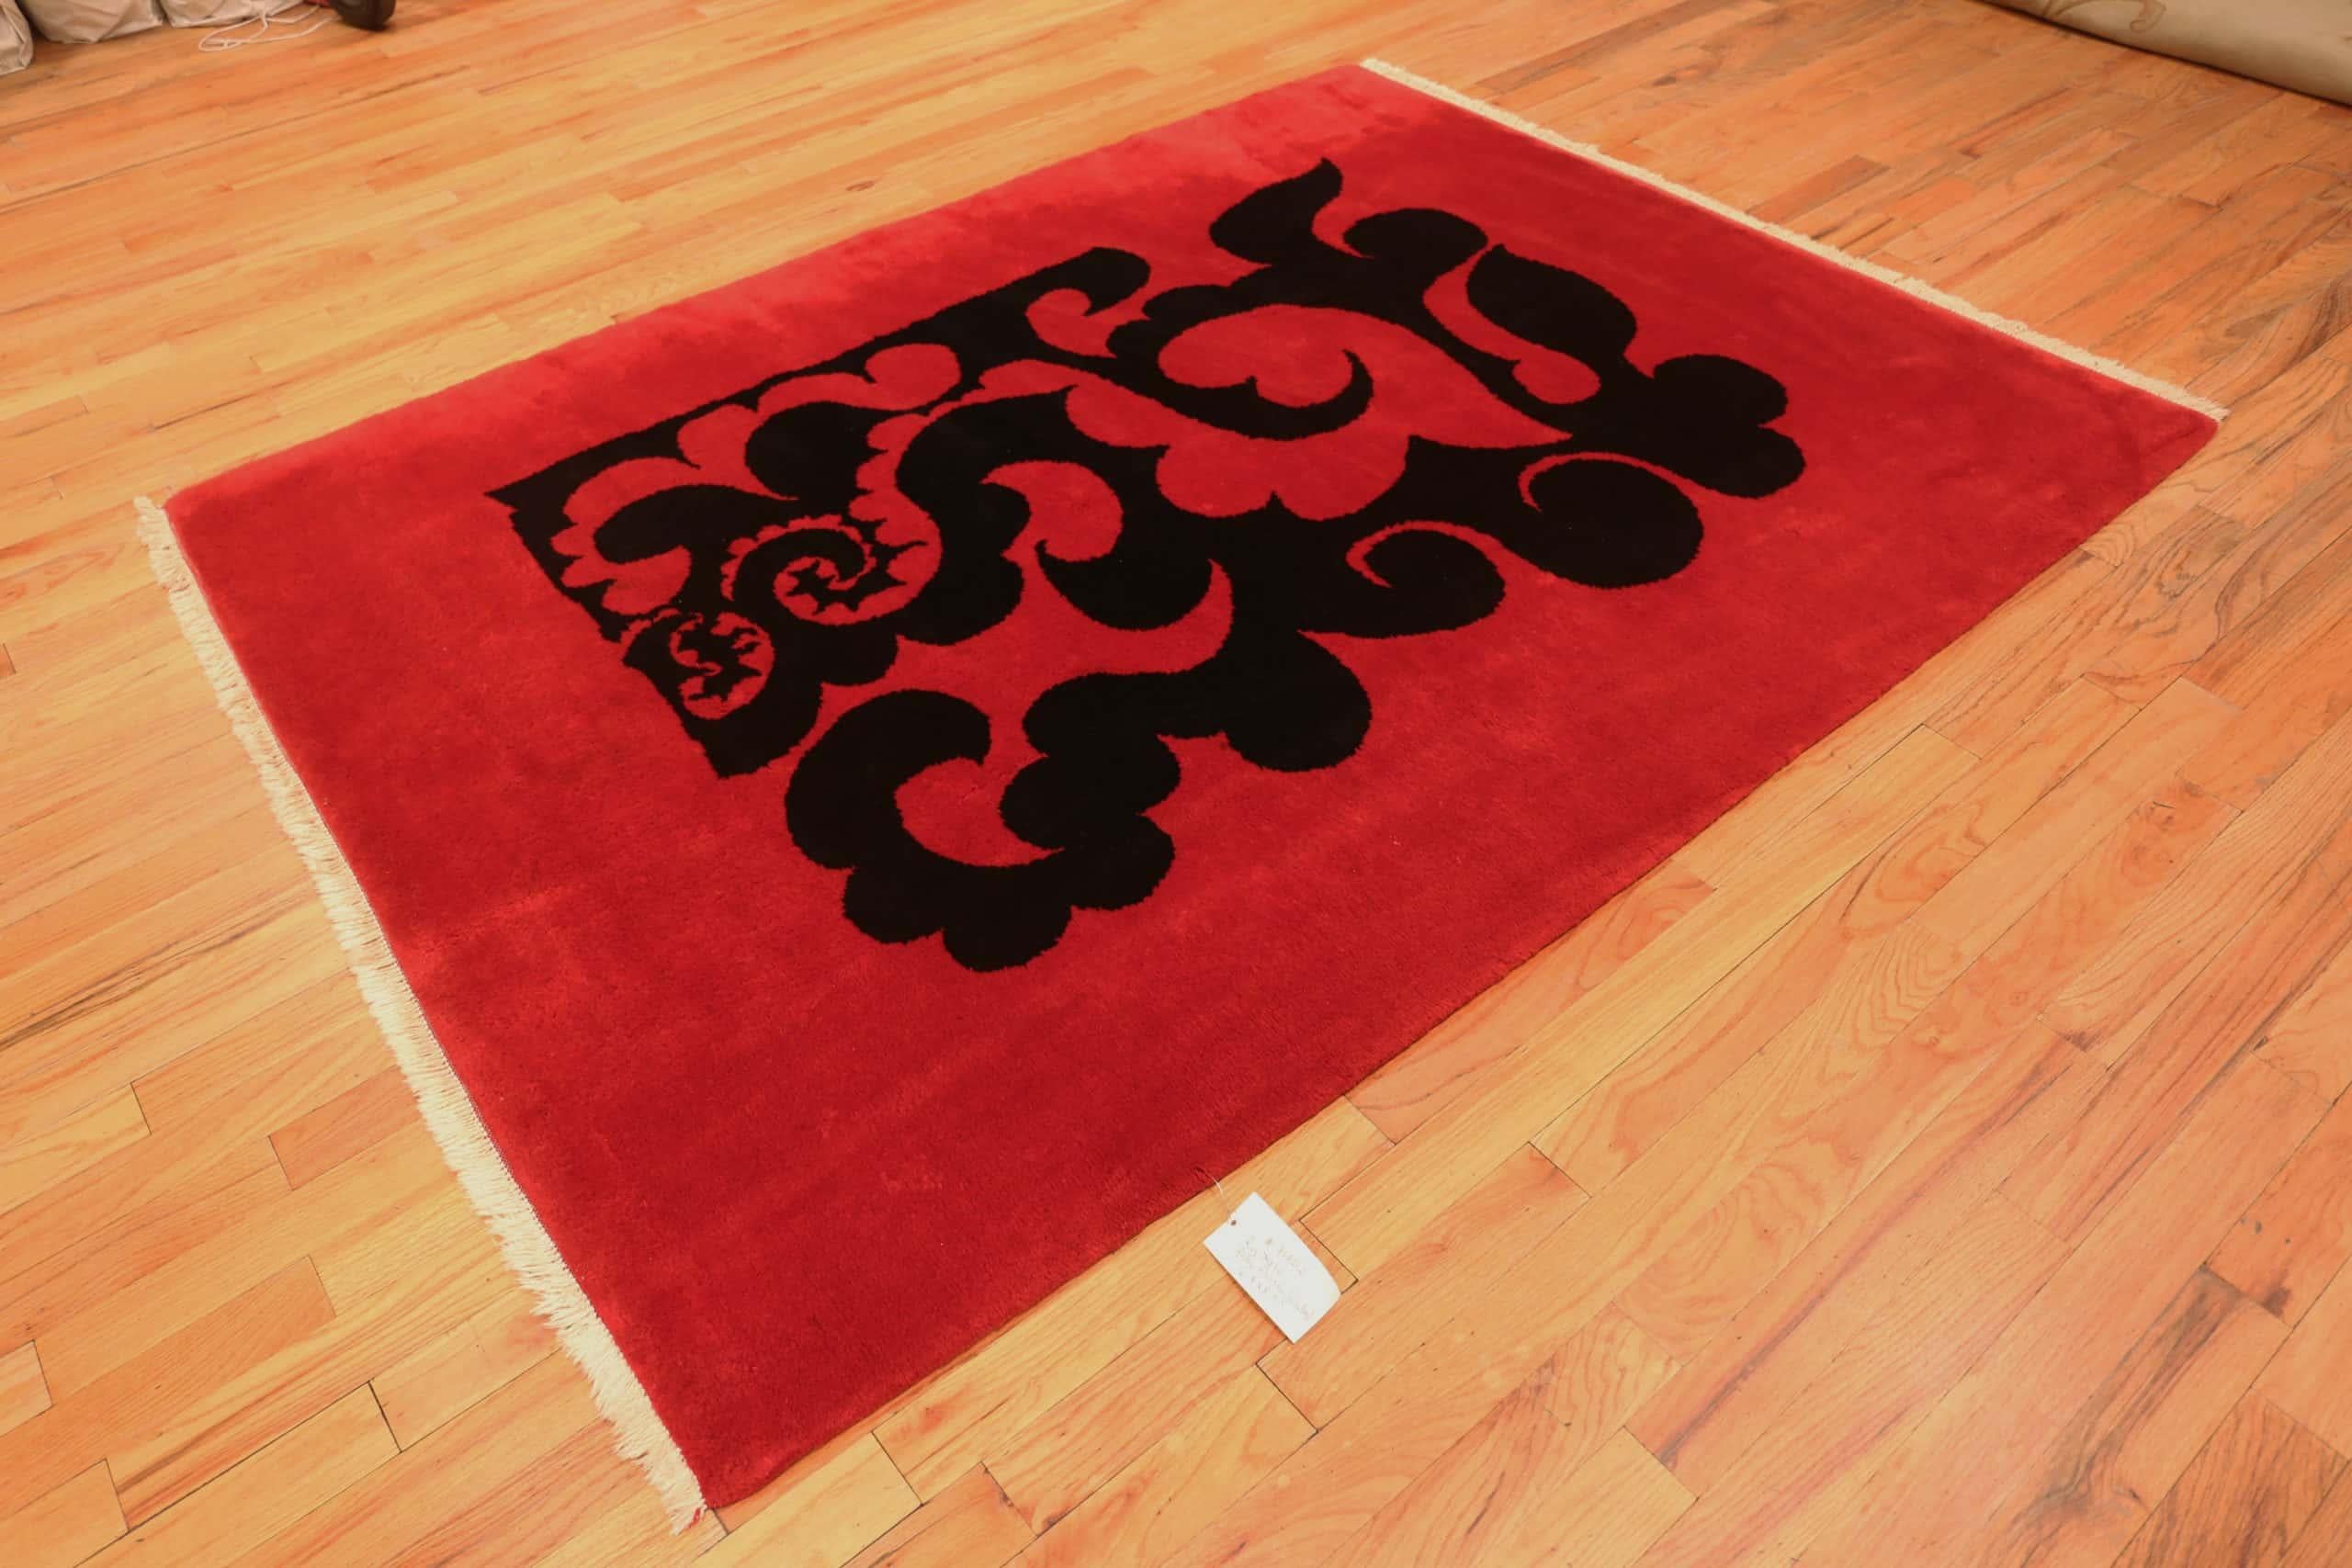 Vintage Pablo Picasso Design Rug. 6 ft 4 in x 8 ft 3 in In Excellent Condition For Sale In New York, NY